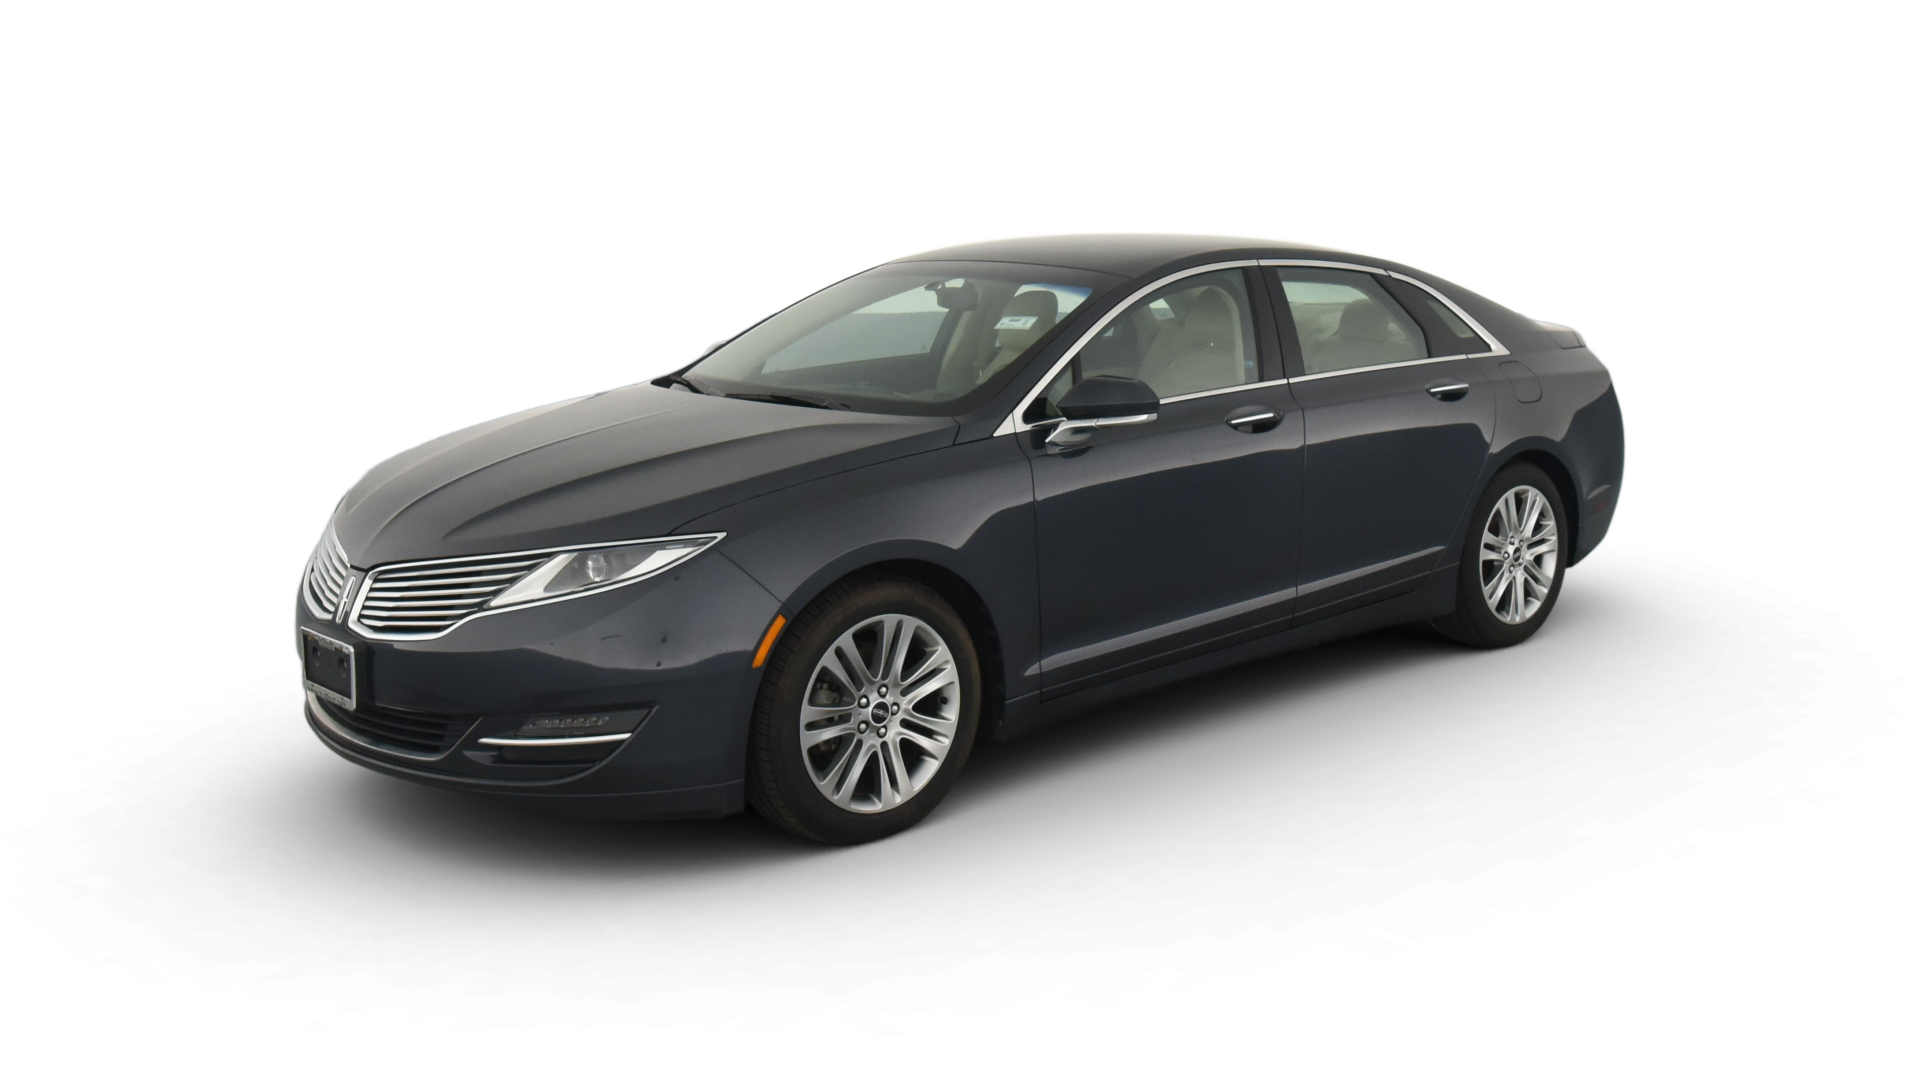 Used Lincoln MKZ Hybrid For Sale Online | Carvana